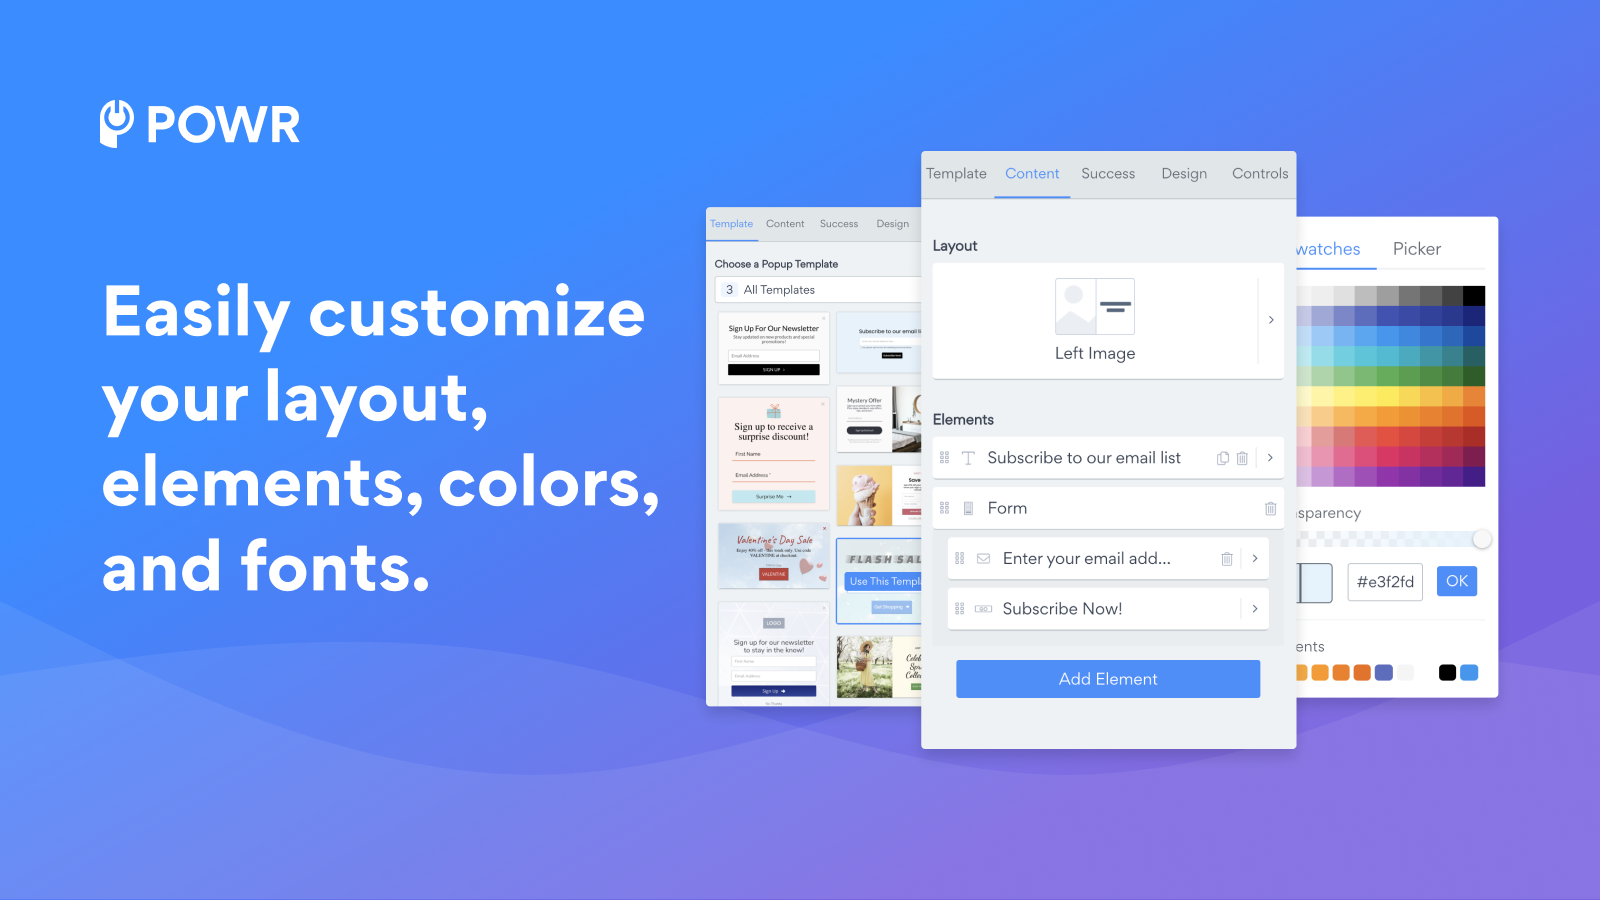 Easily customize your layout, elements, colors and fonts